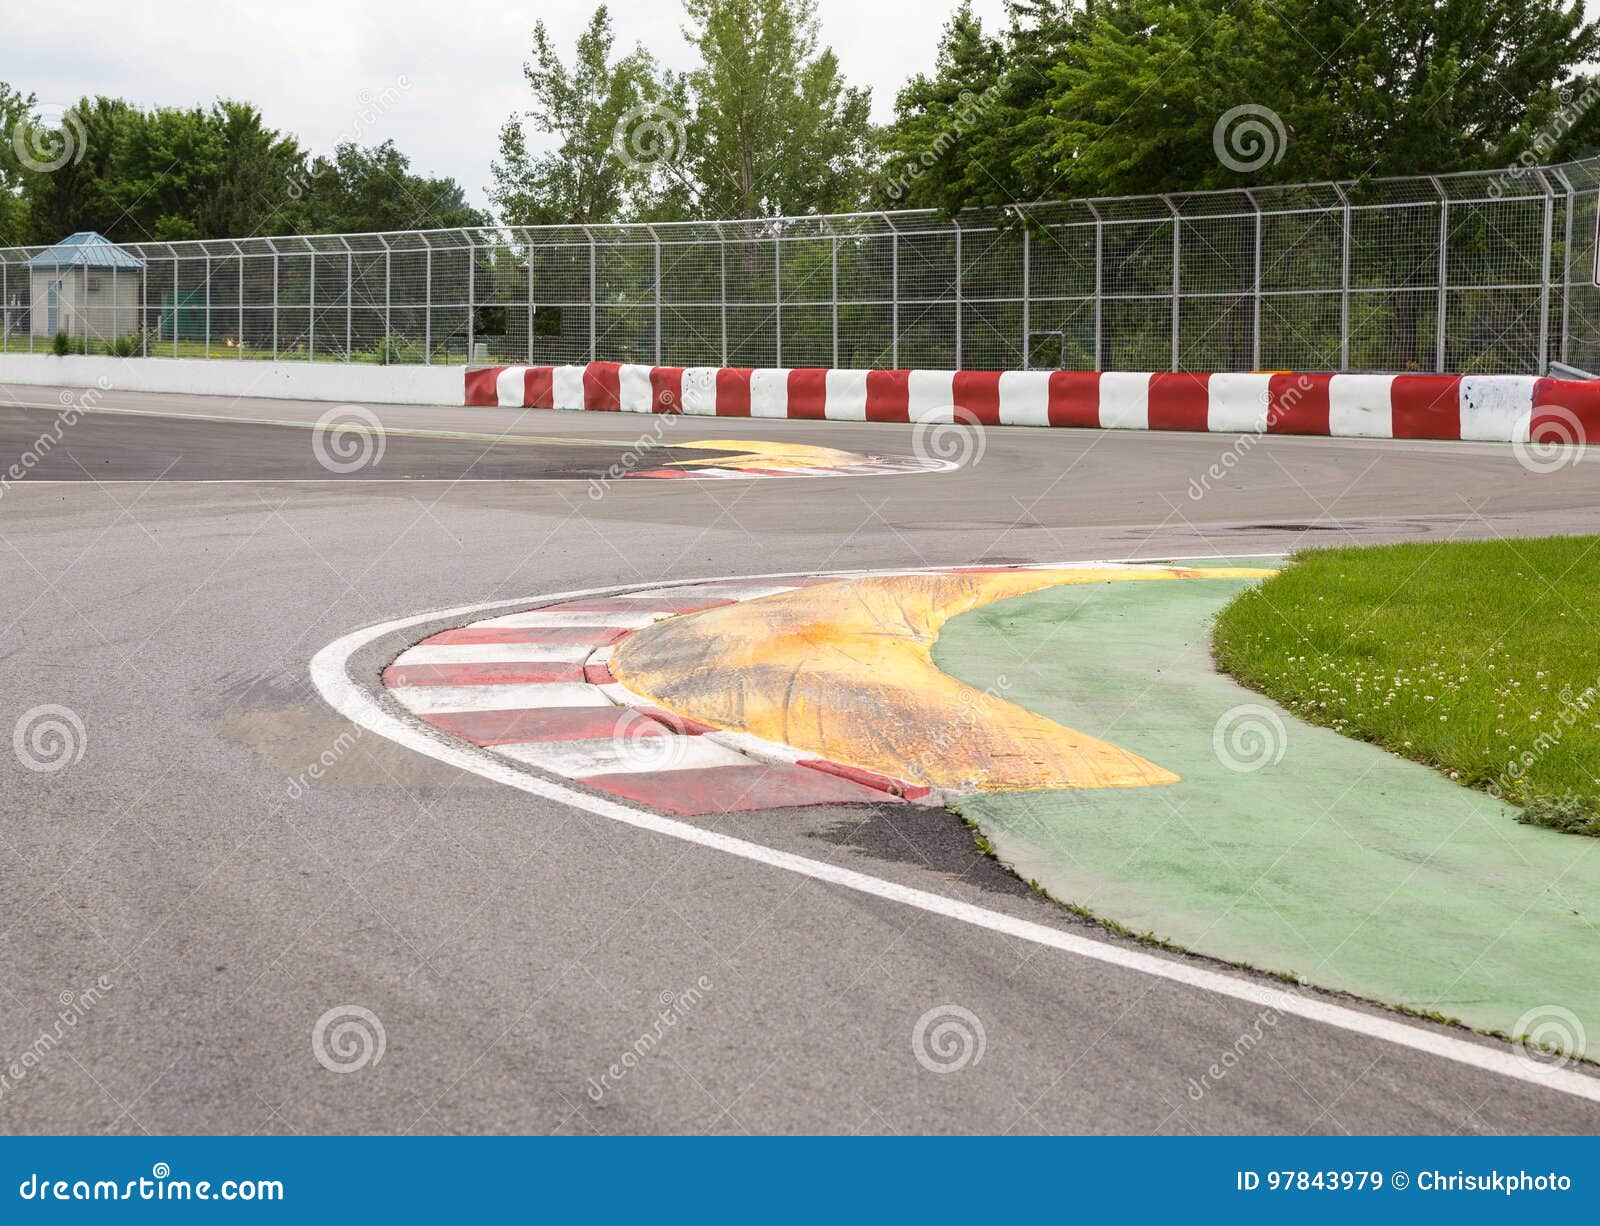 Approaching Wall of Champions on Circuit Gilles Villeneuve Stock Image - of parc, 97843979